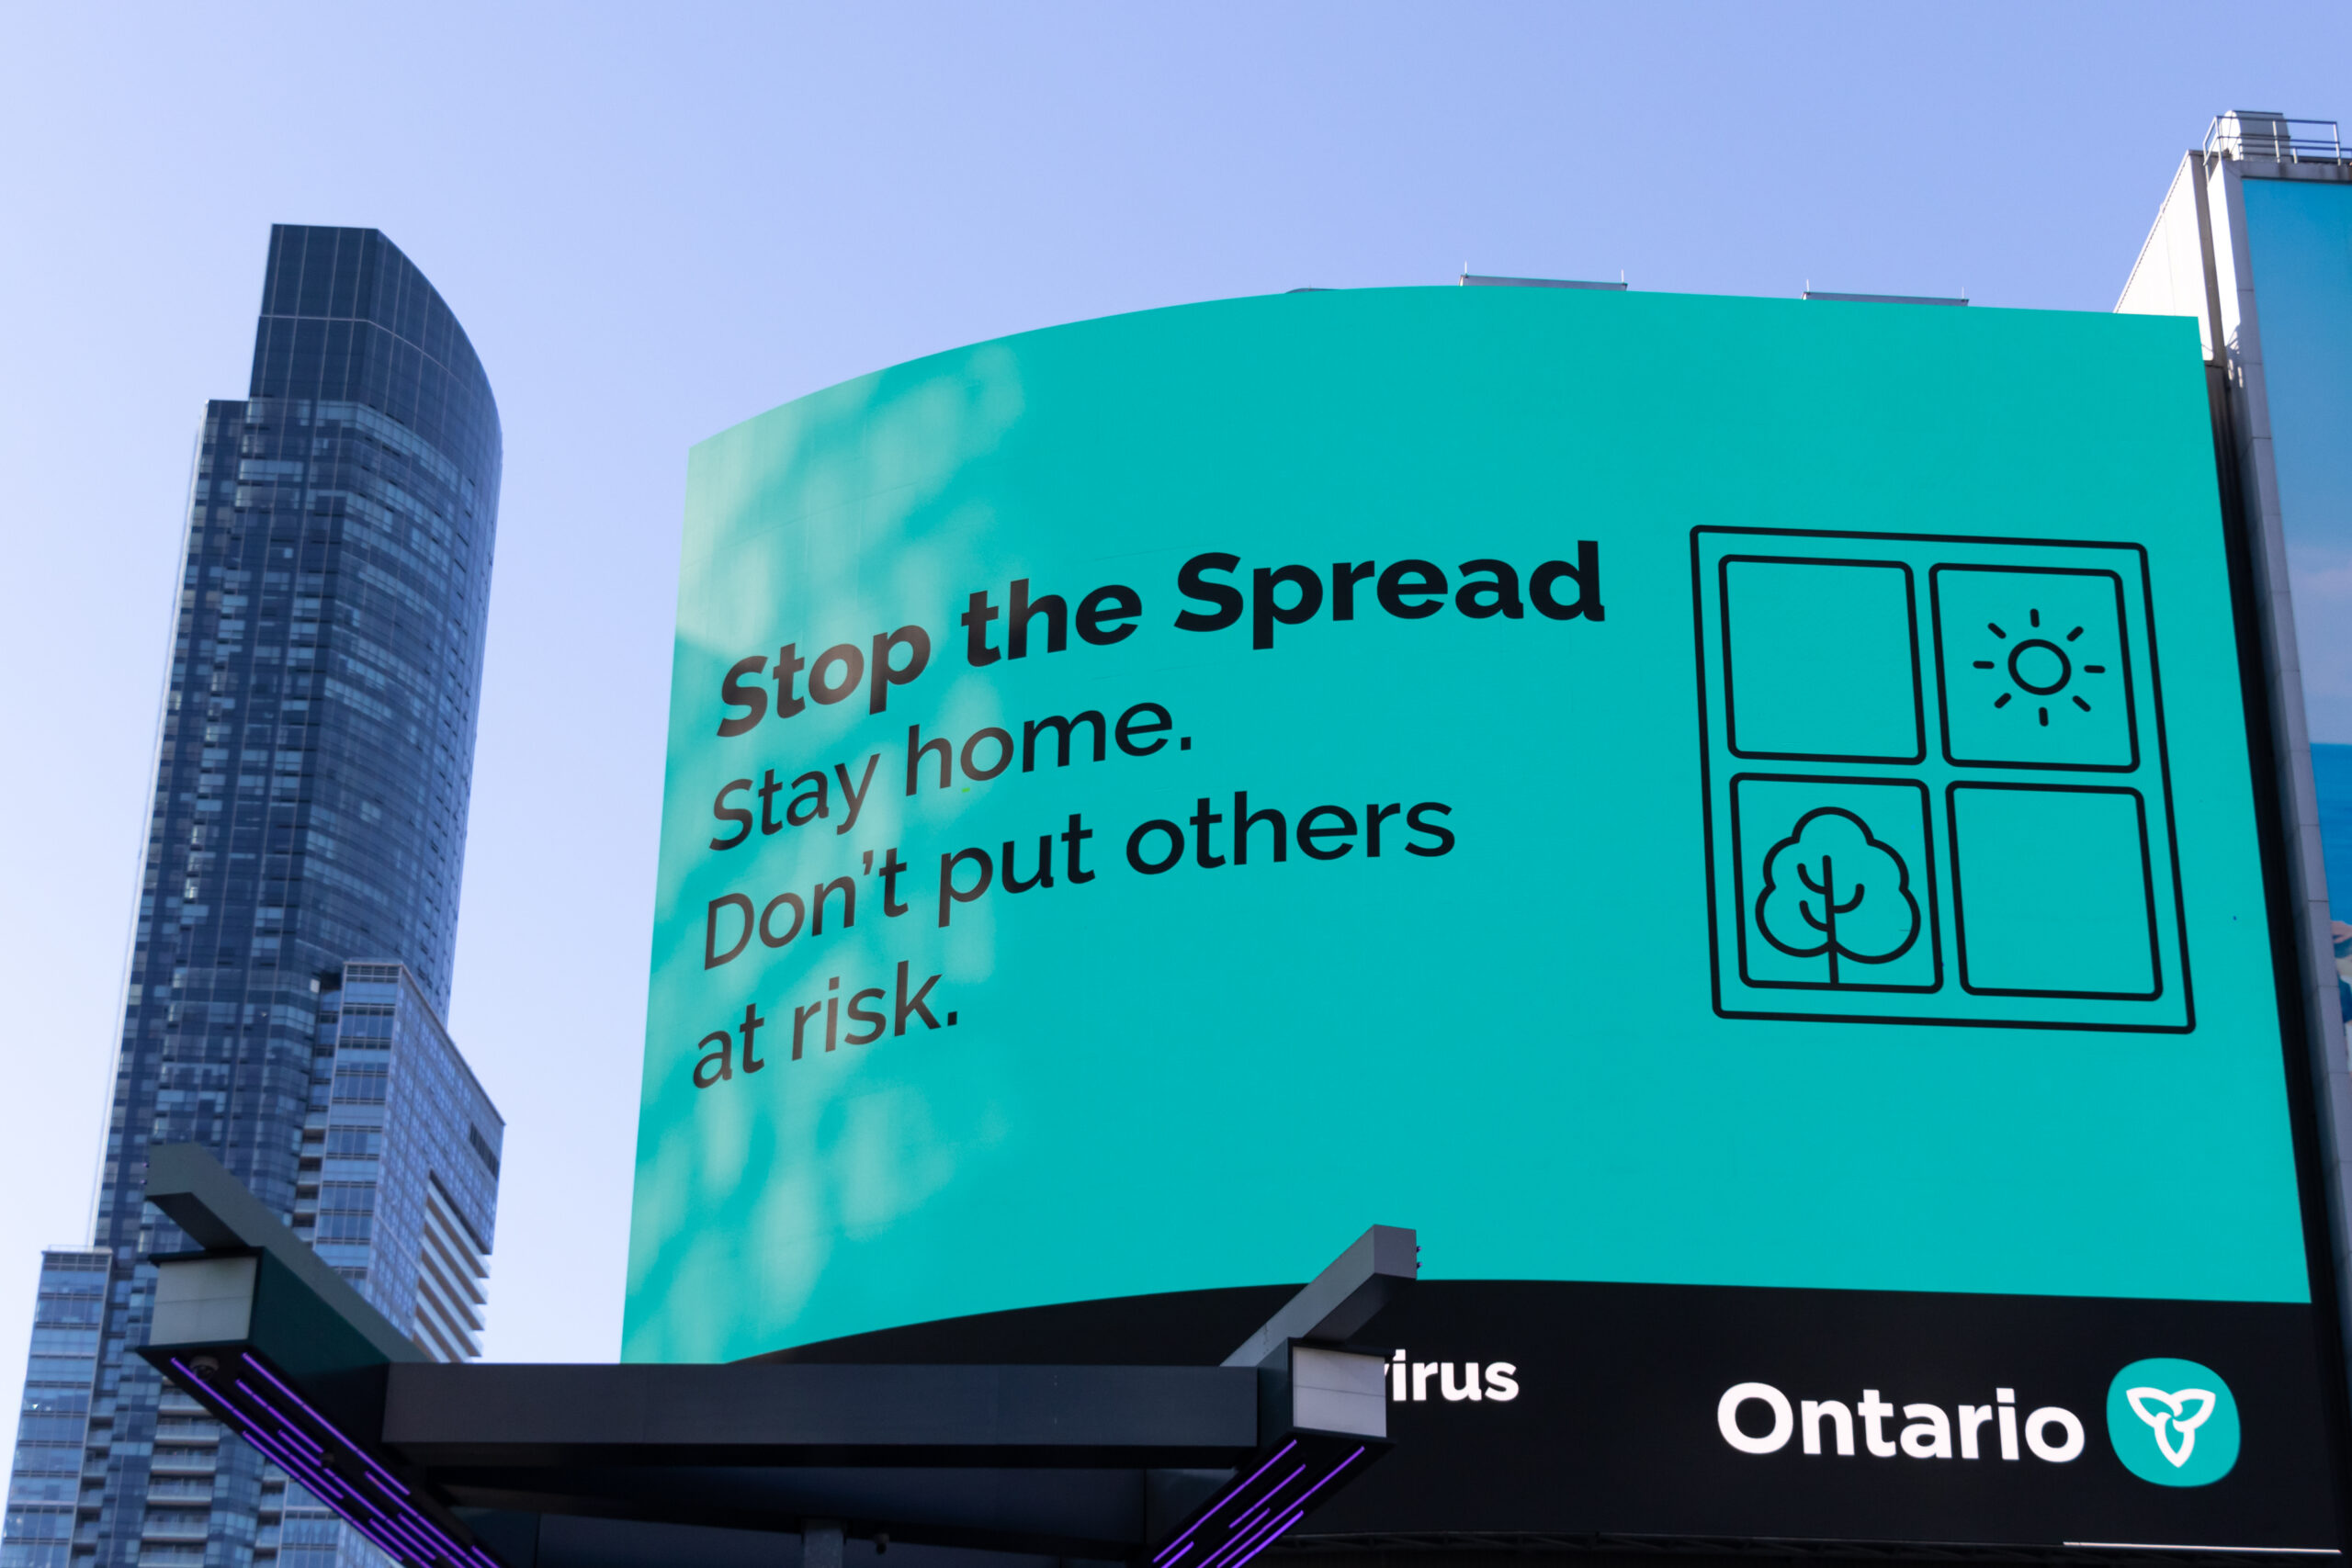 At least 47% of people experiencing homelessness in Toronto had a history of SARS-CoV-2 infection by early 2022